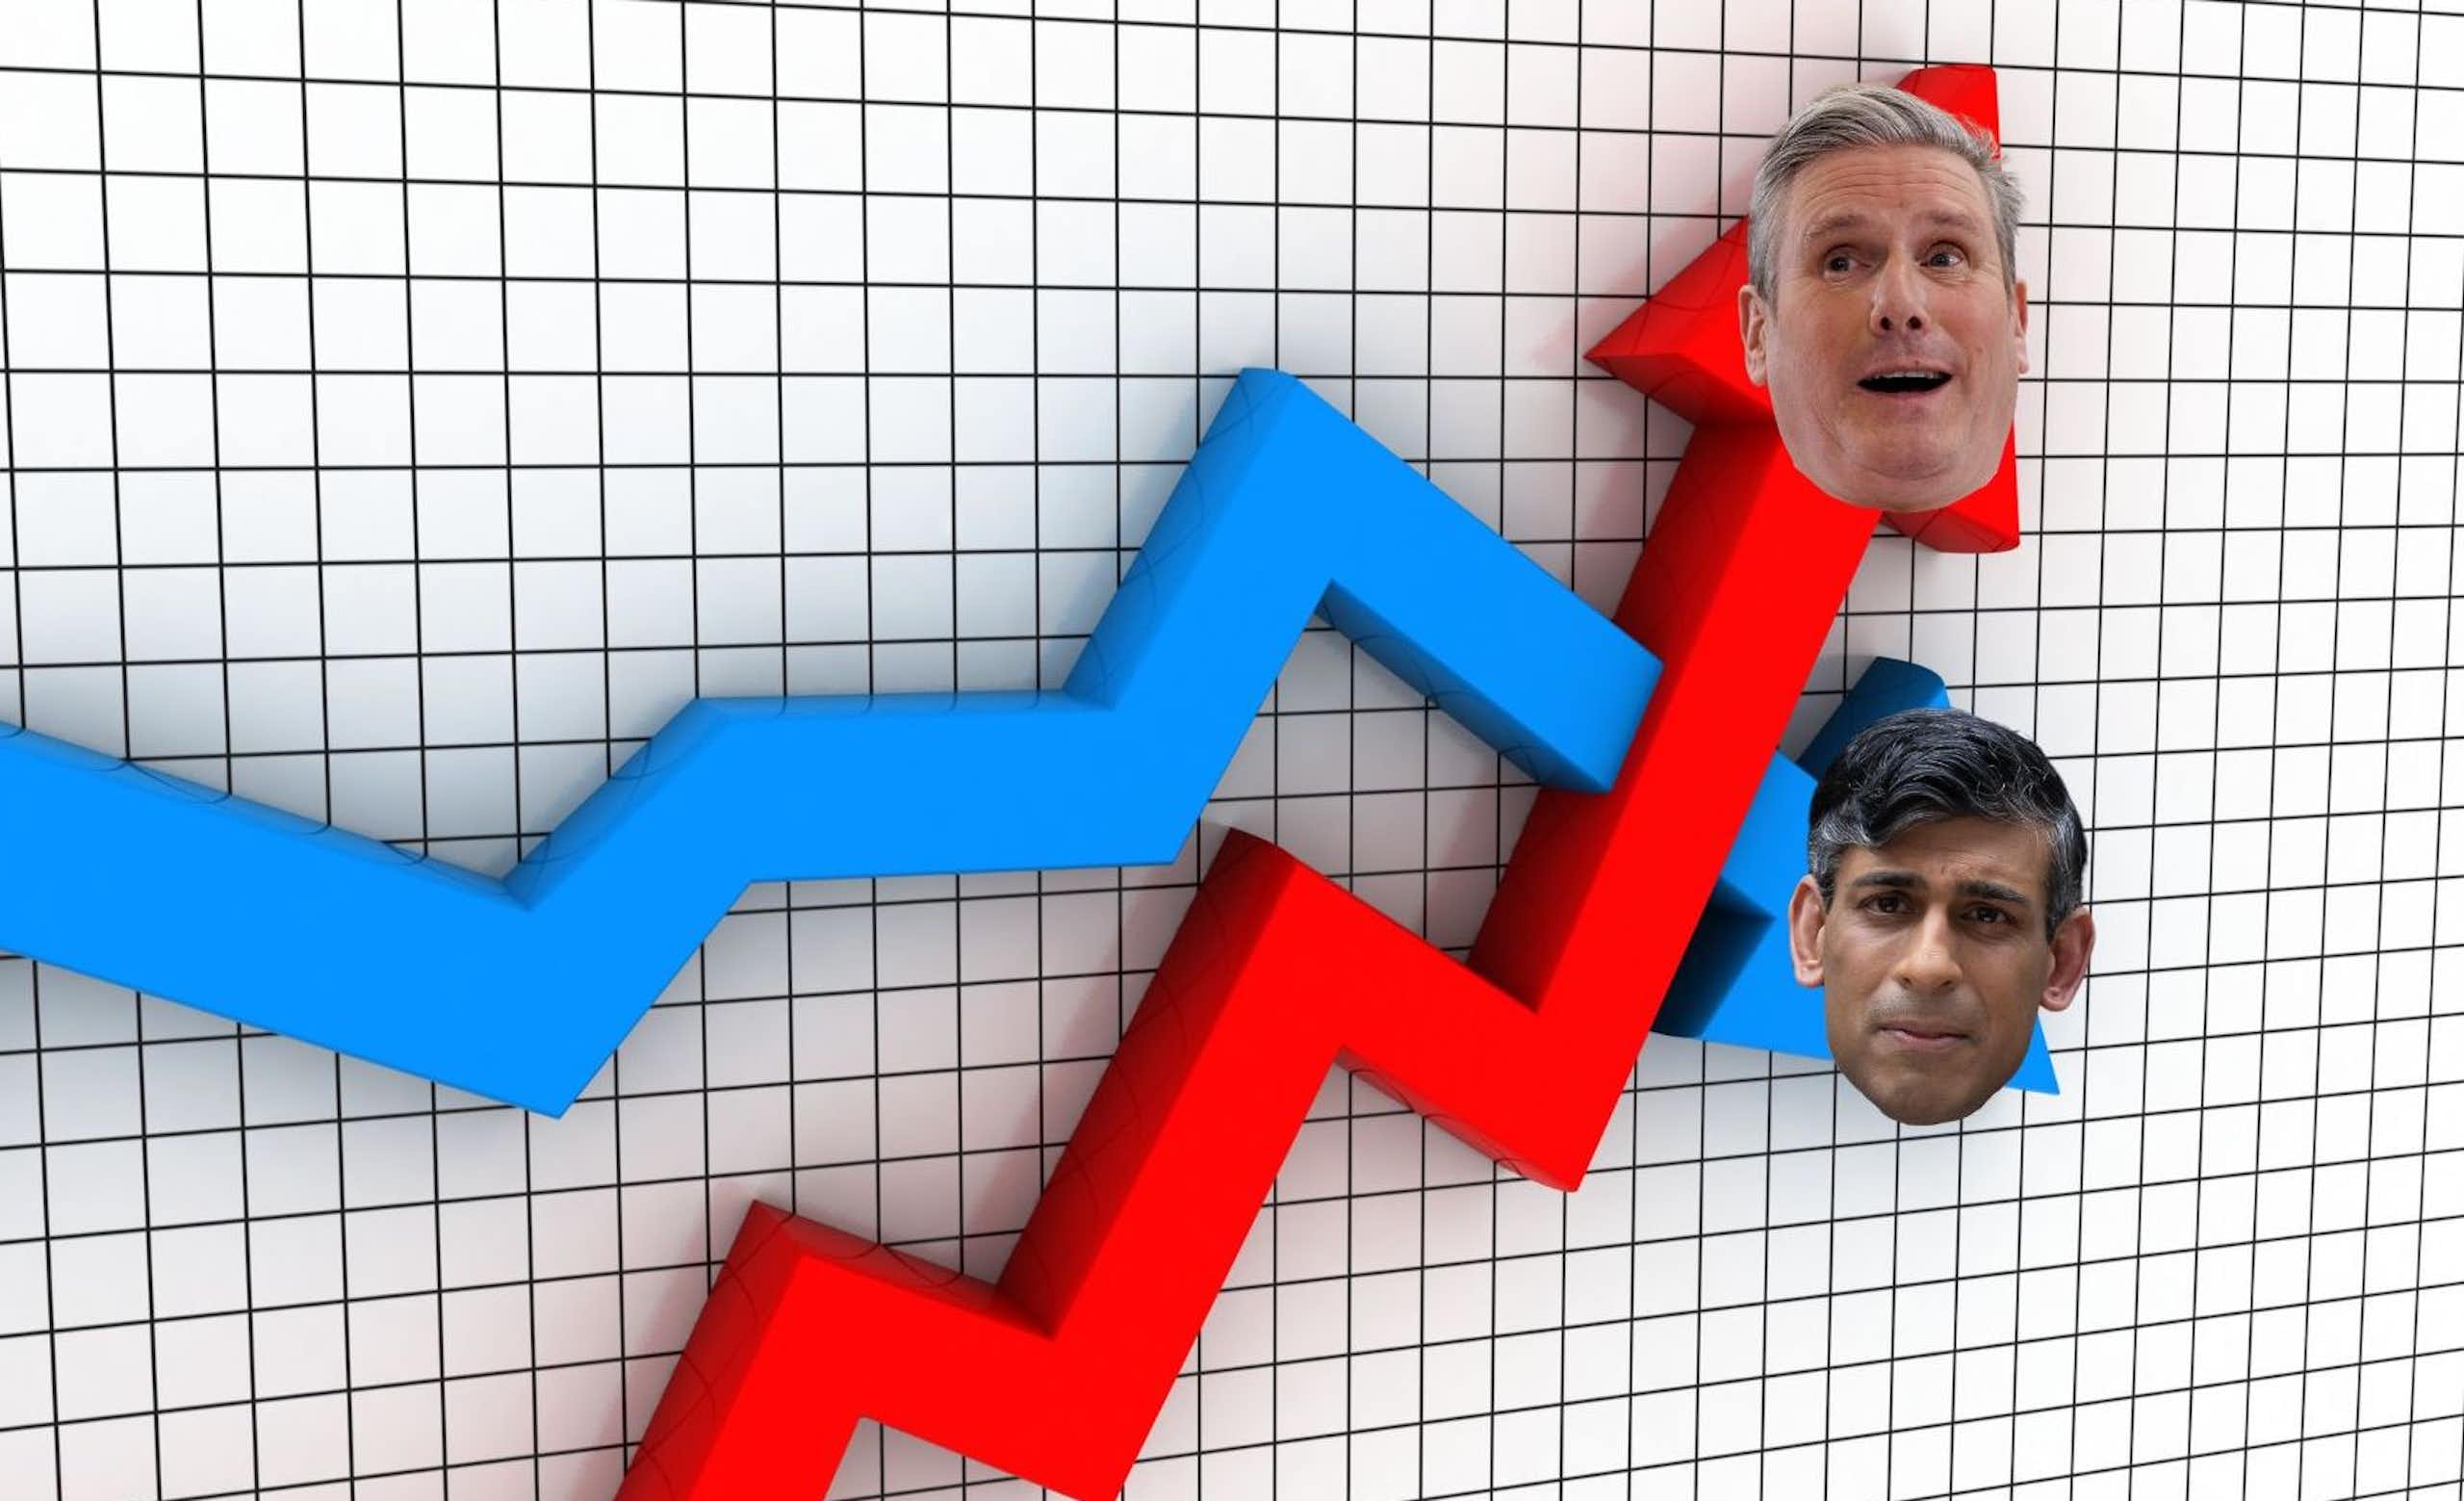 A chart with a red line going up, with Keir Starmer's face on it and a blue line going down, with Rishi Sunak's face on it